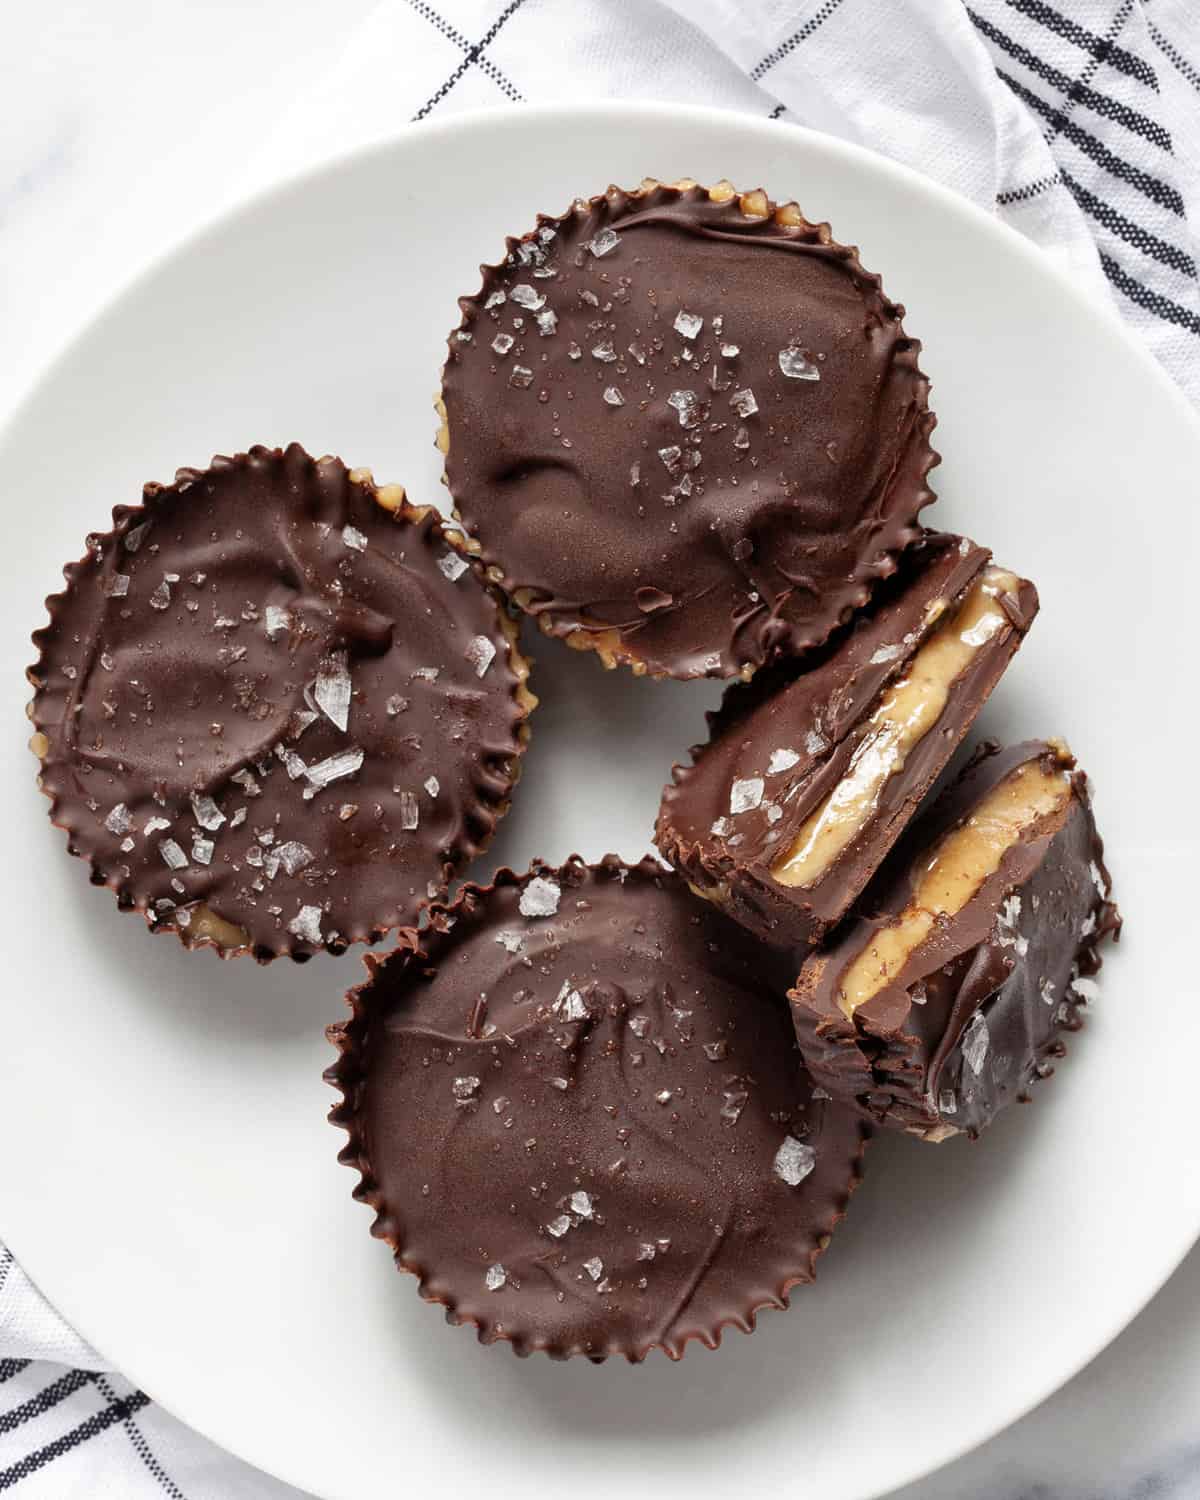 Three whole peanut butter cups and one split in half.